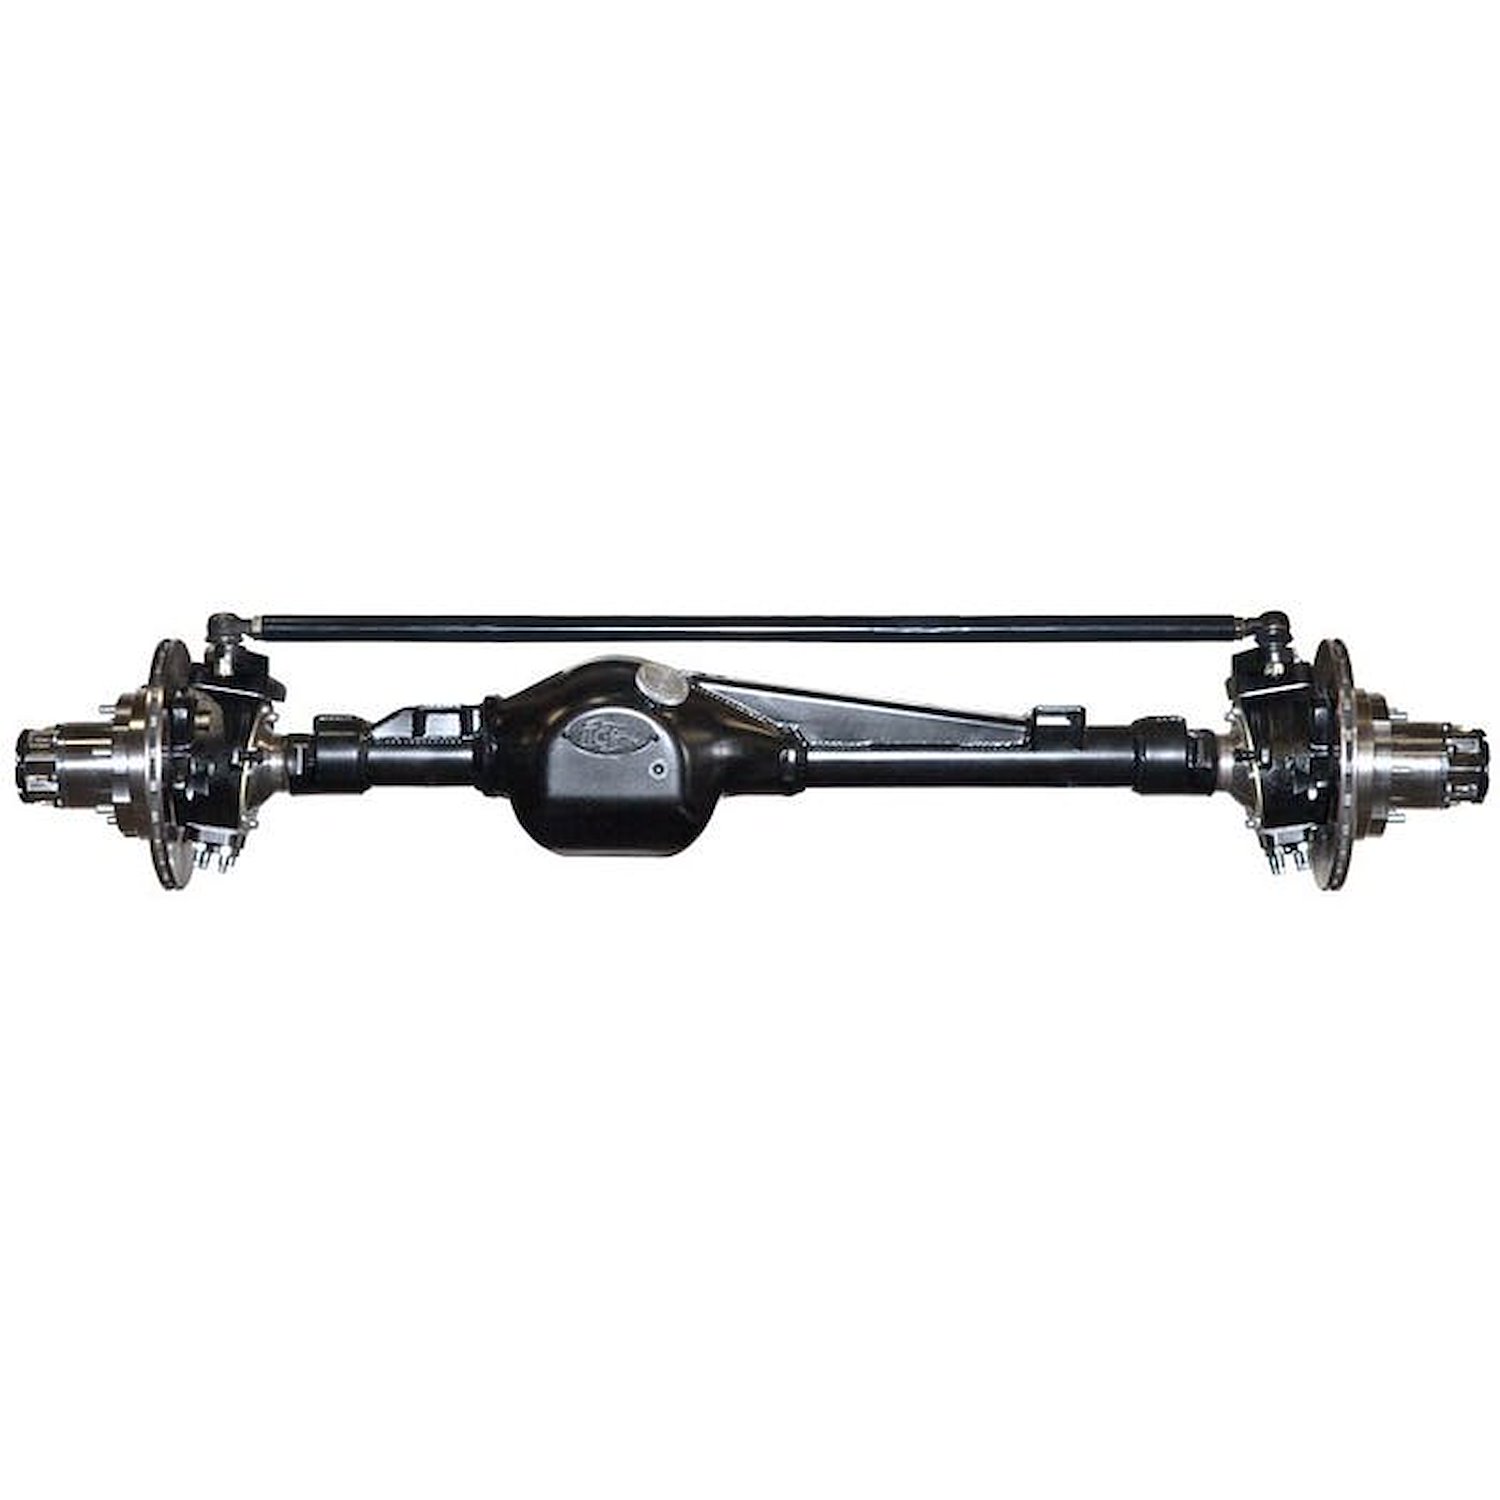 301611-1-KIT Rock Assault Fully-Built Front Axles, +3 Width, LHD, High-Pinion, 5.29, Grizzly, Locking Hubs, Toyota